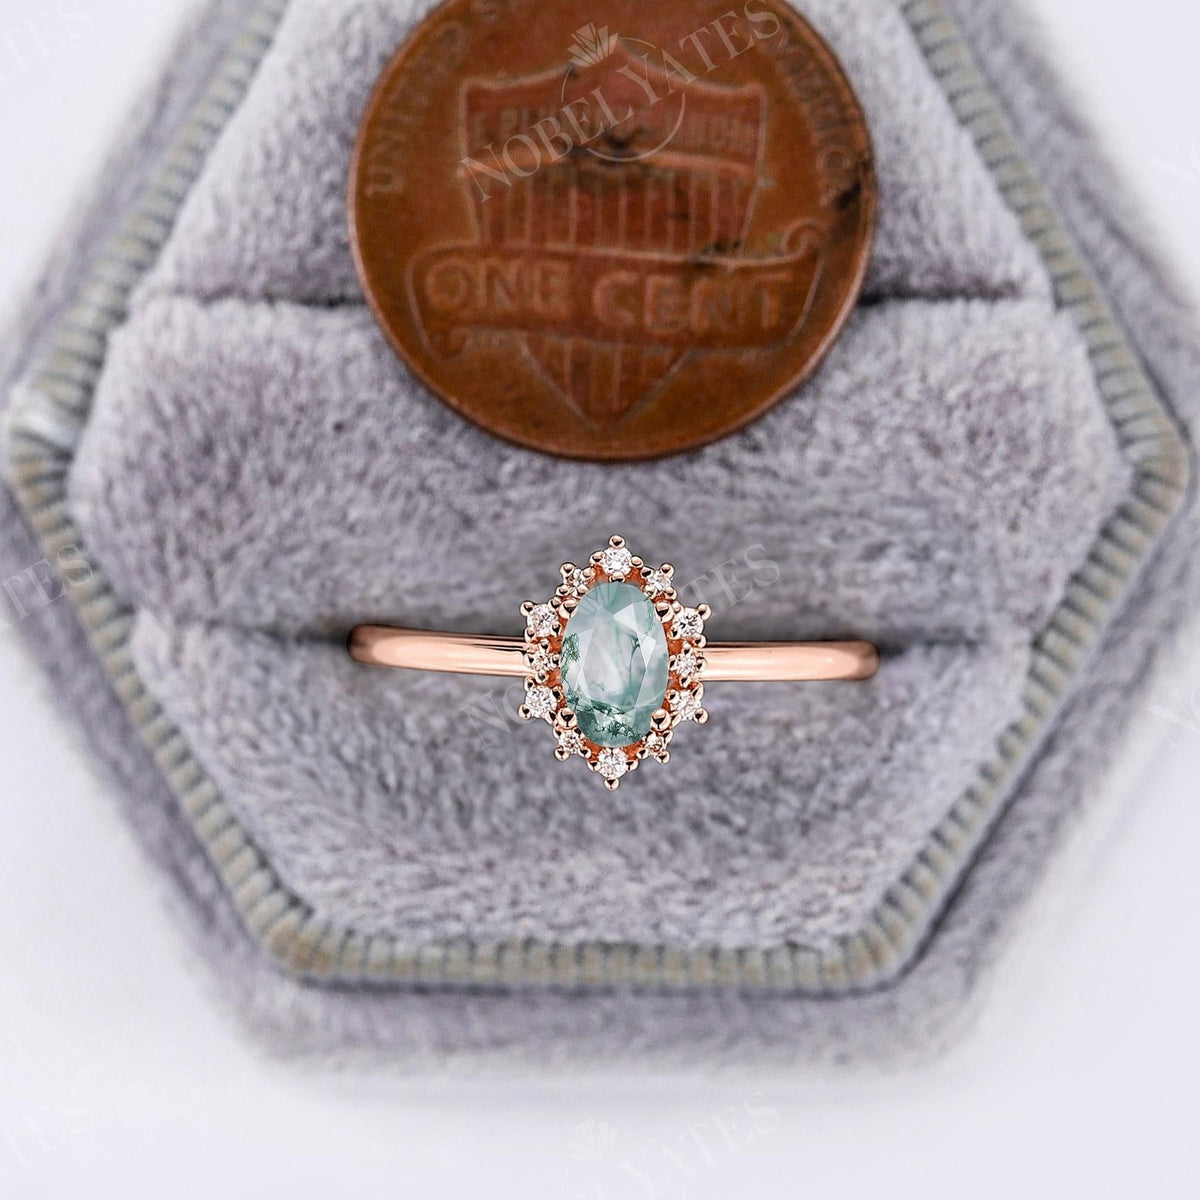 Moss Agate Oval Halo Engagement Ring Rose Gold